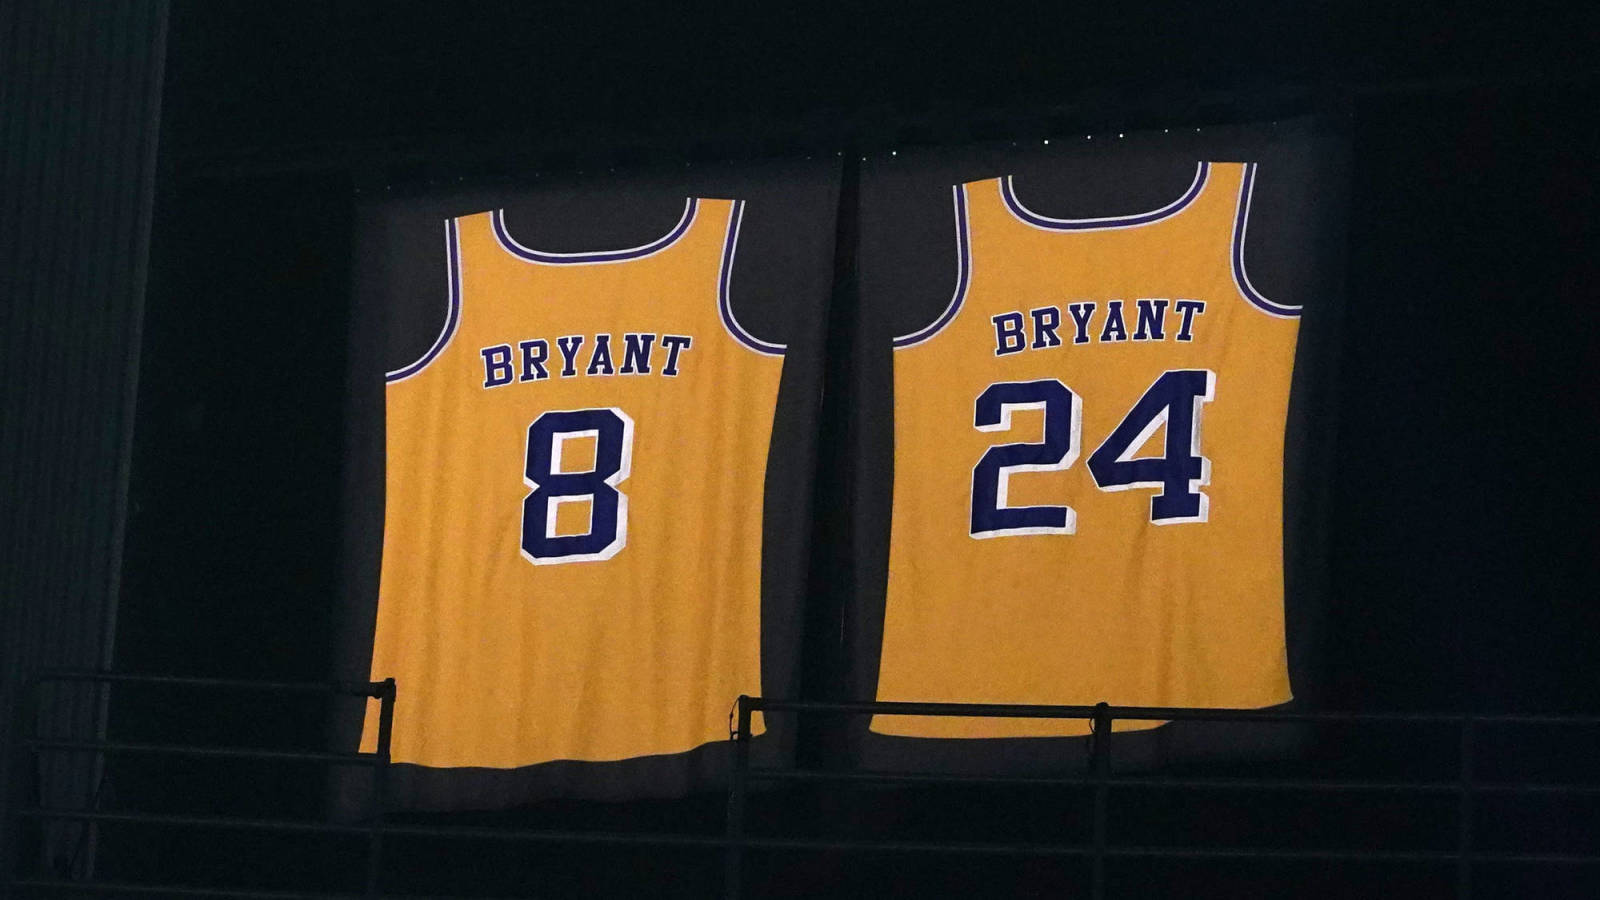 Mamba Week: Nike honors Kobe Bryant with new sneaker, jersey releases on 8/24